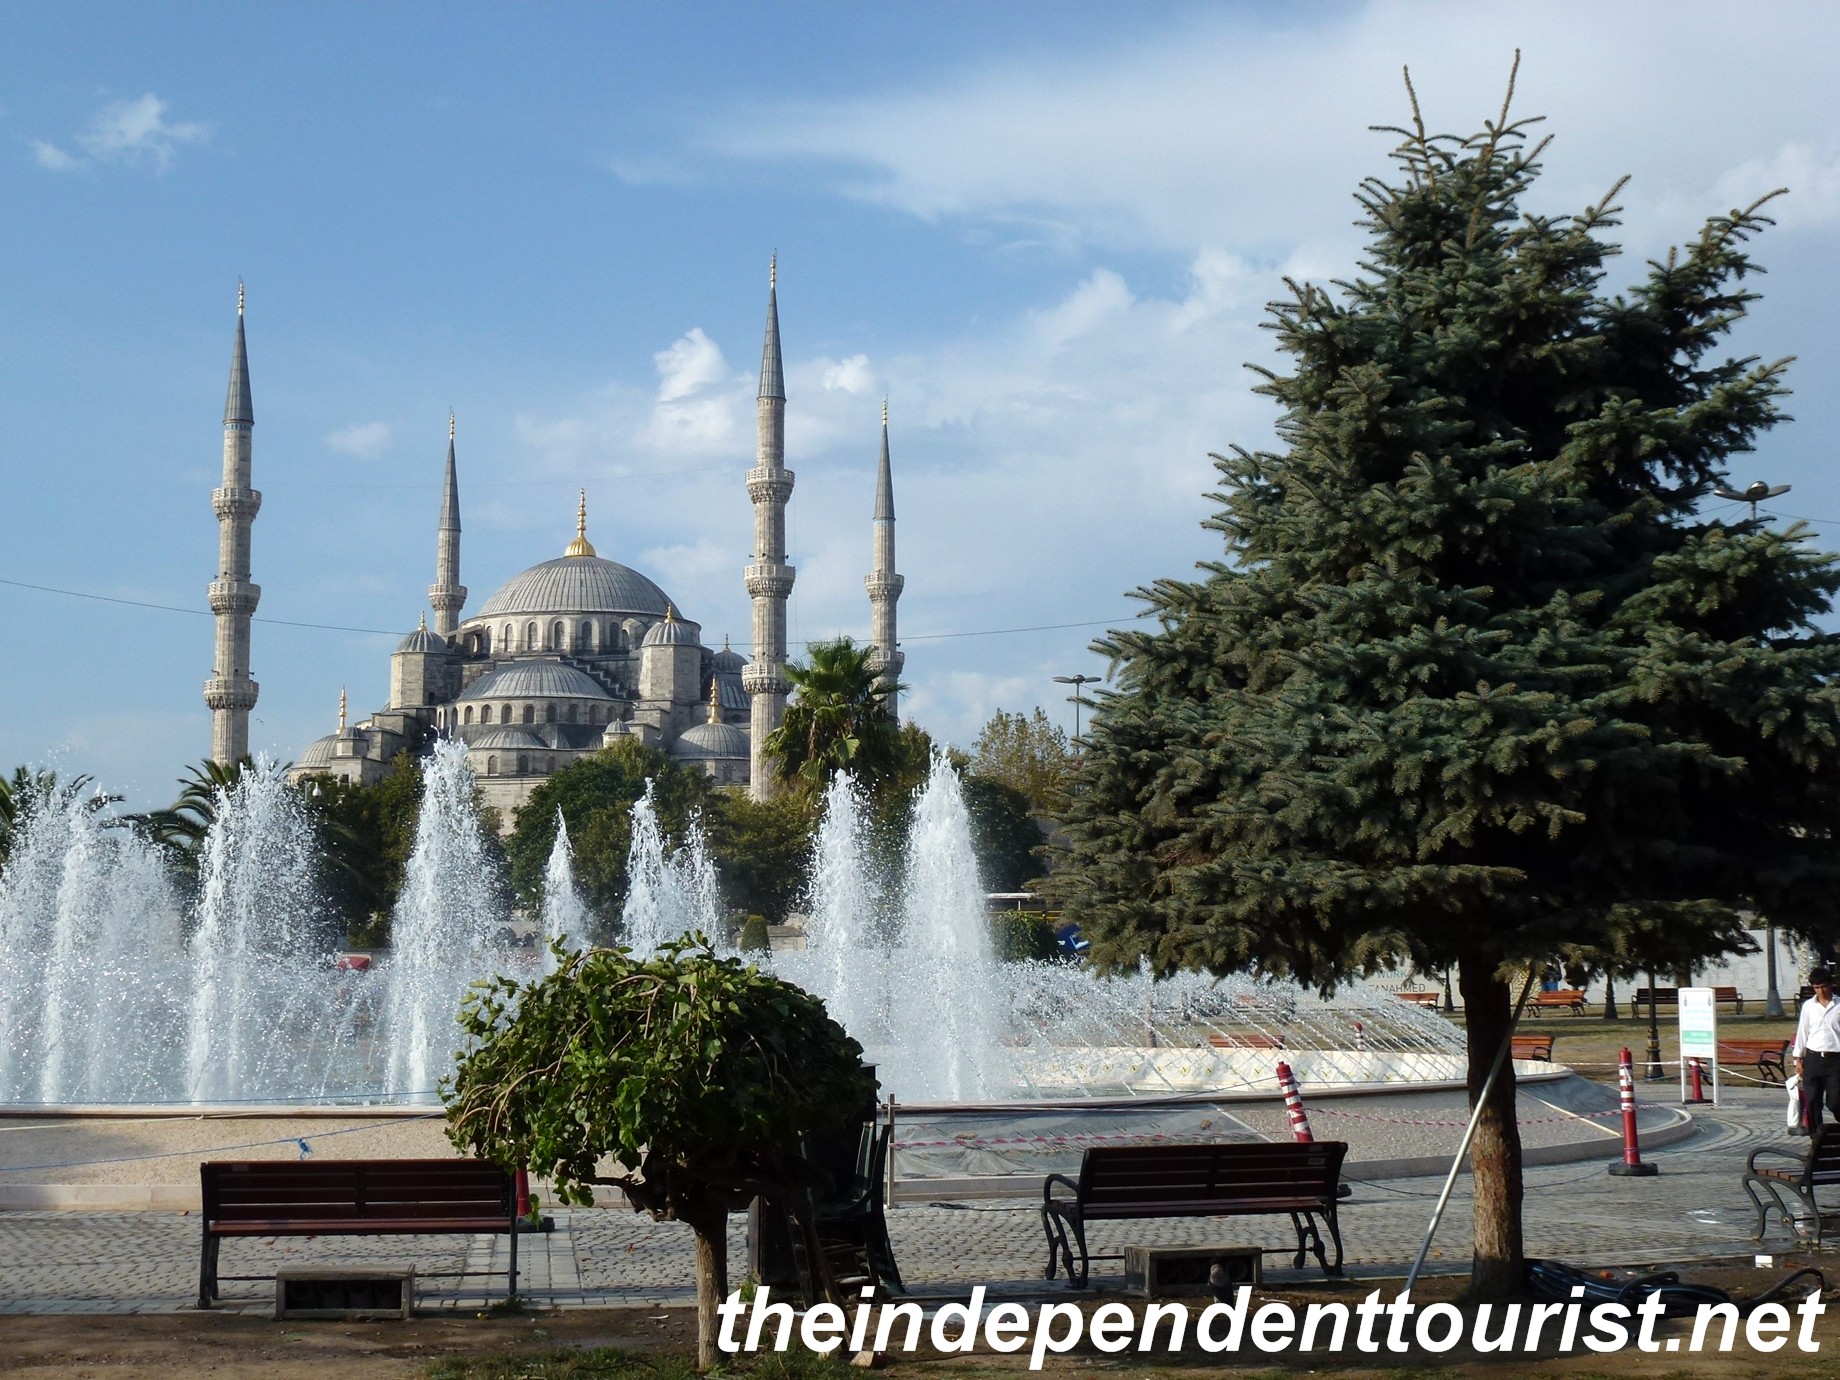 A view of the Blue Mosque from Sultanahmet Square, between the Hagia Sophia and the Blue Mosque.